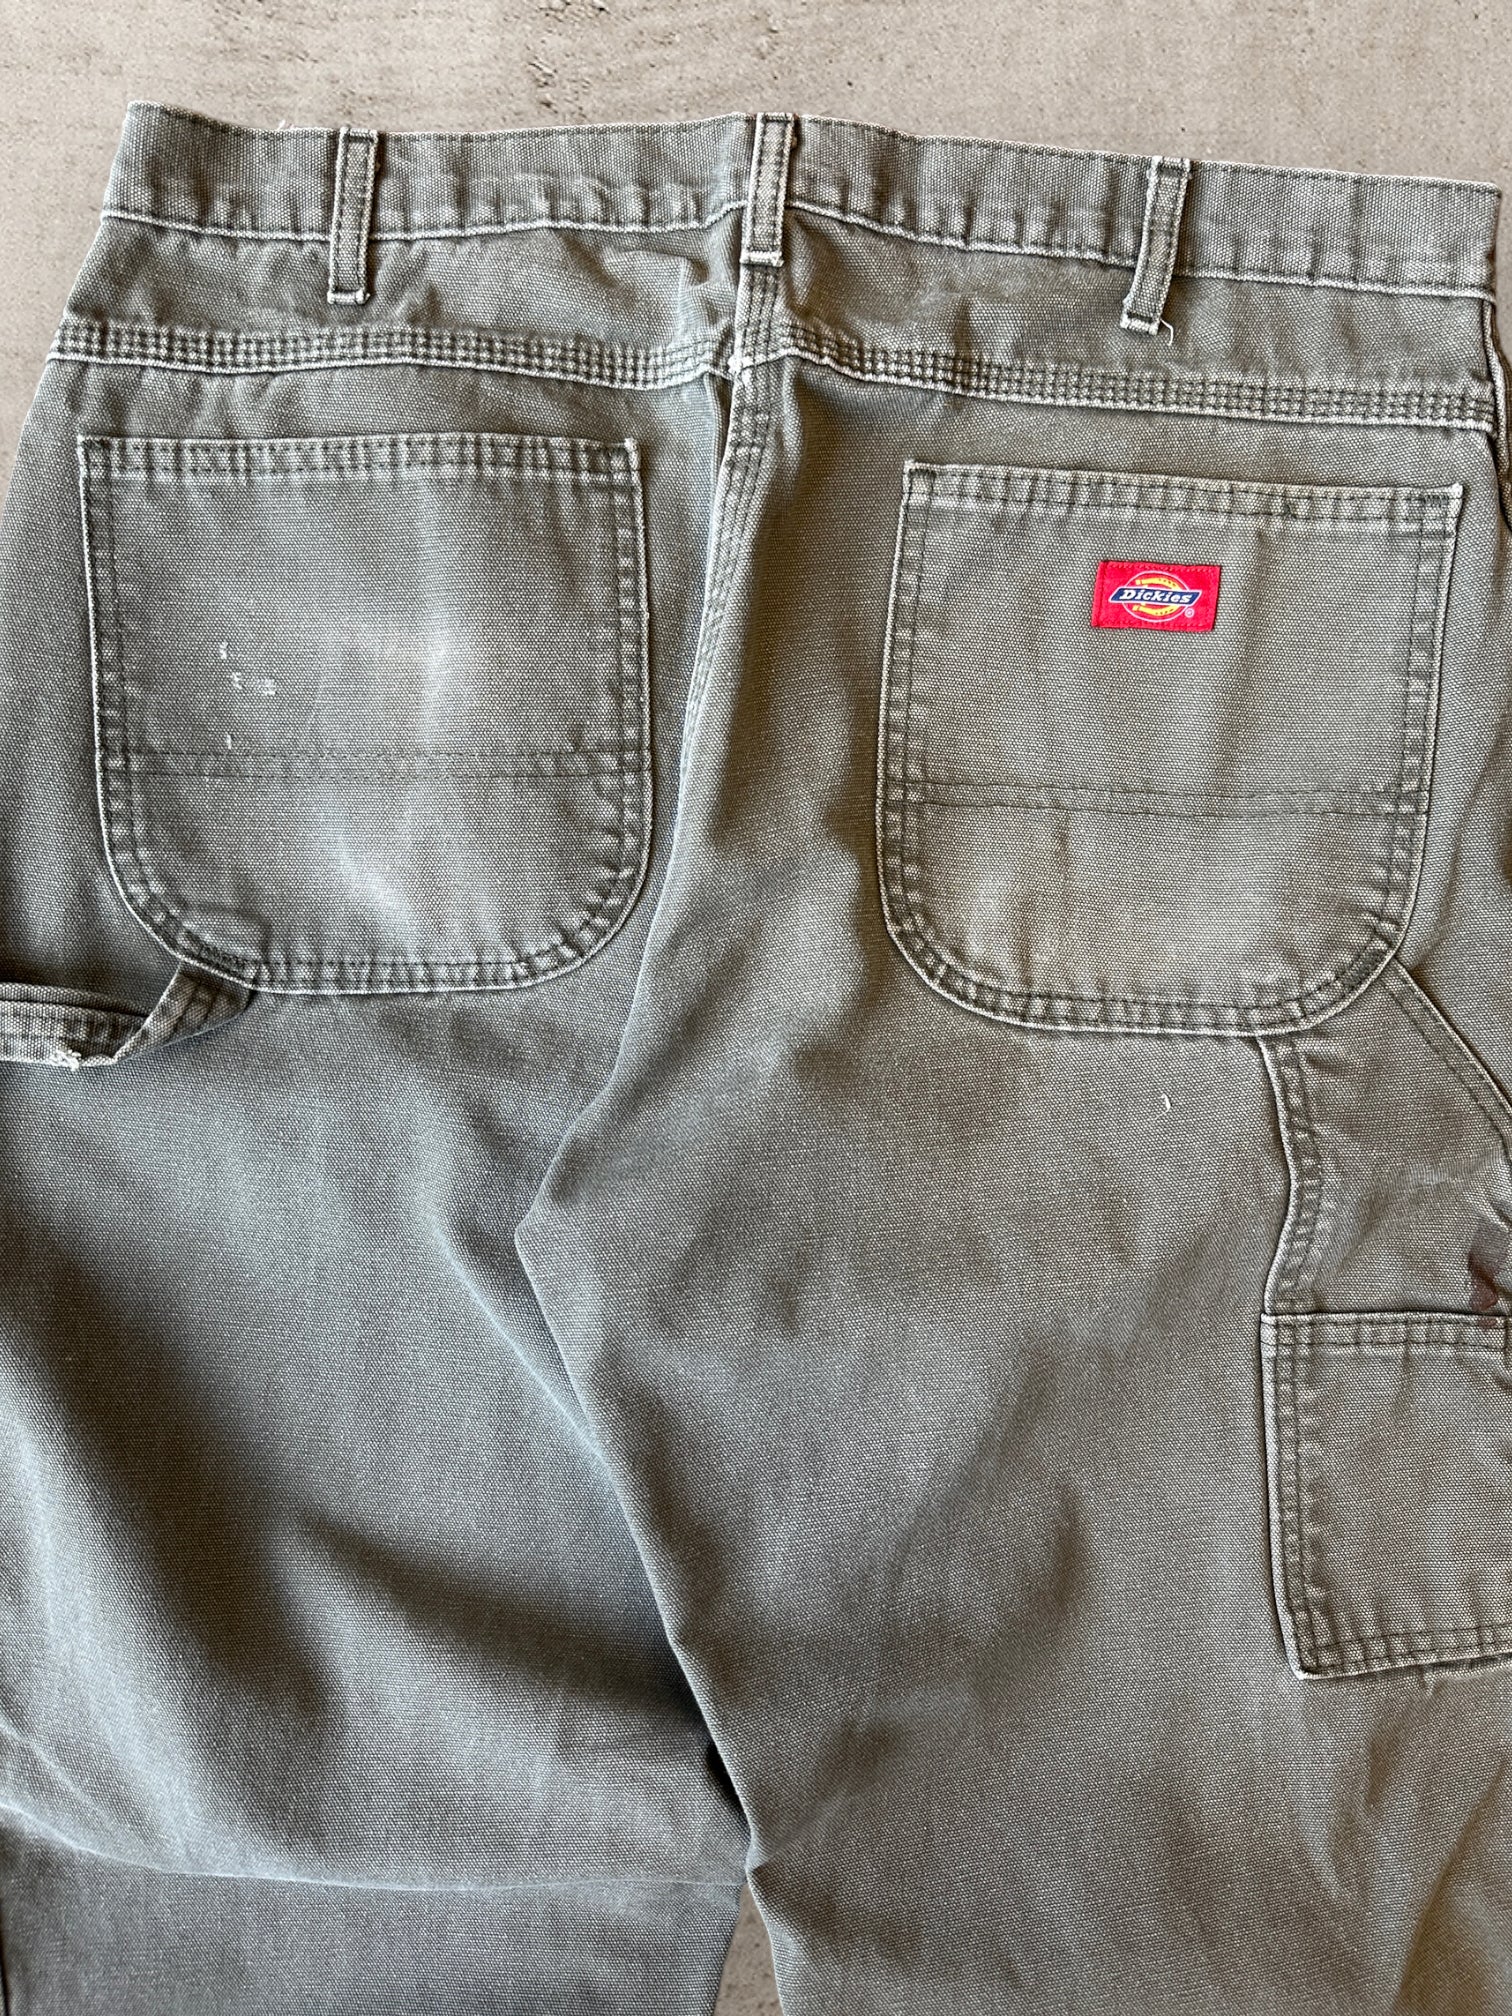 00s Dickies Olive Green Faded Carpenter Pants - 35x33